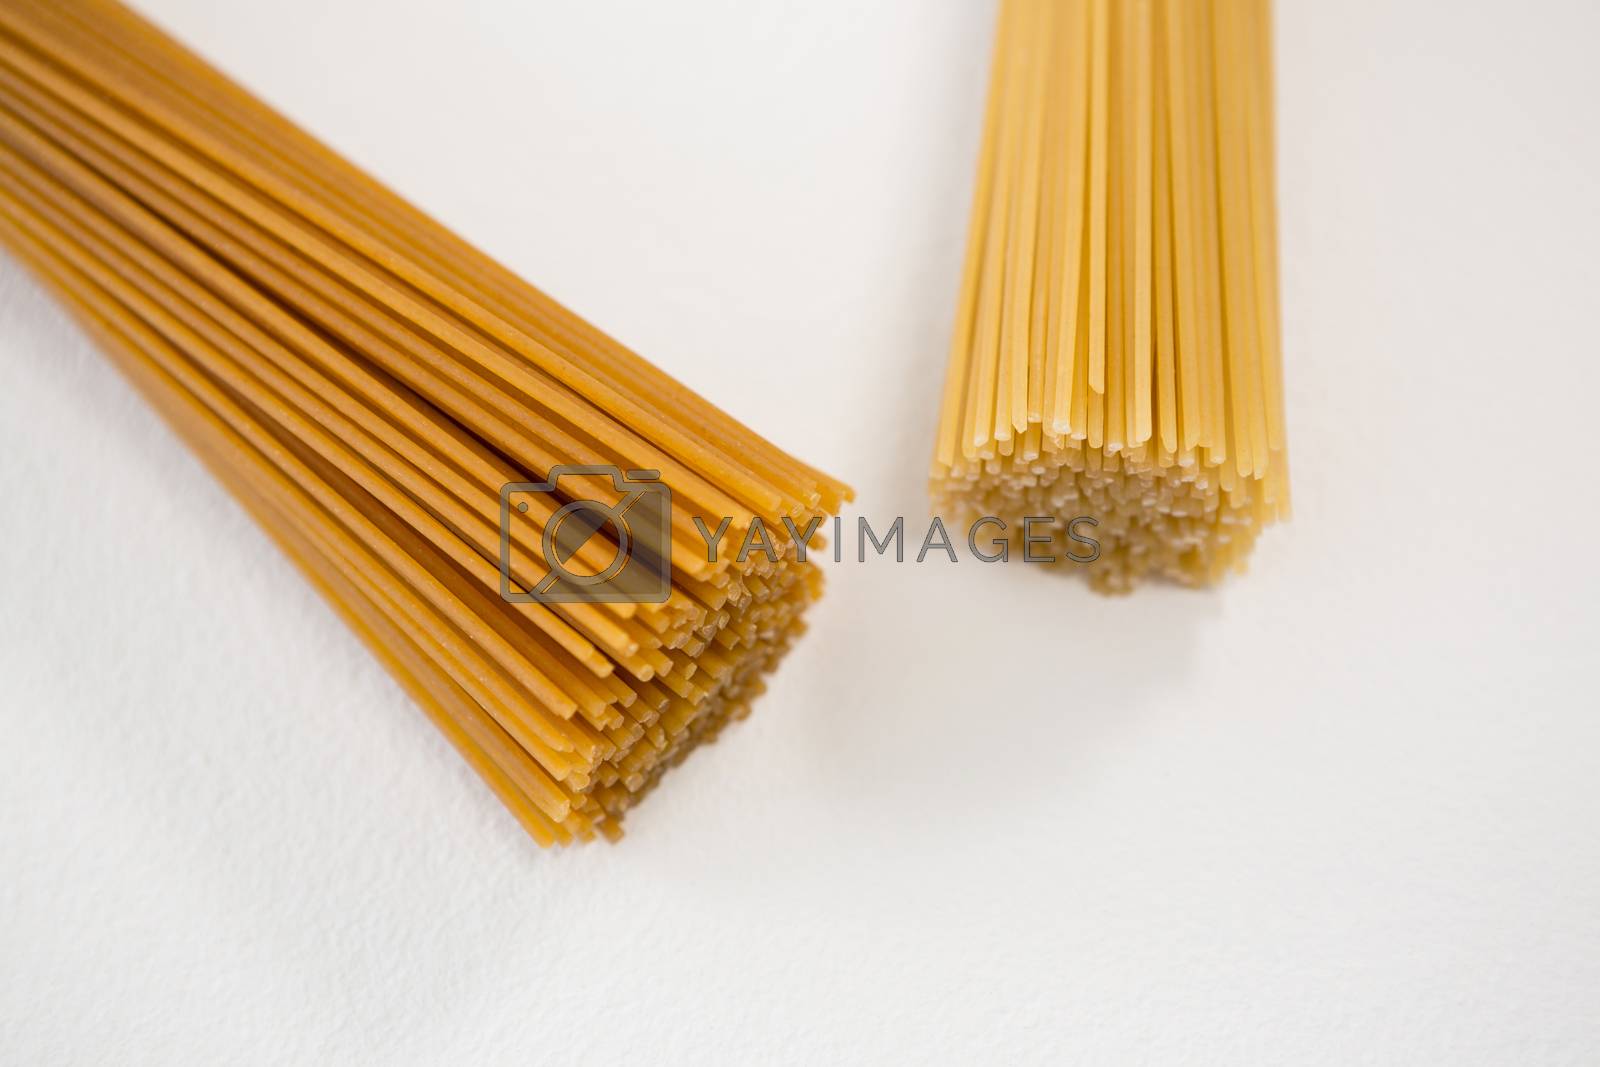 Royalty free image of Bunches of raw spaghetti by Wavebreakmedia